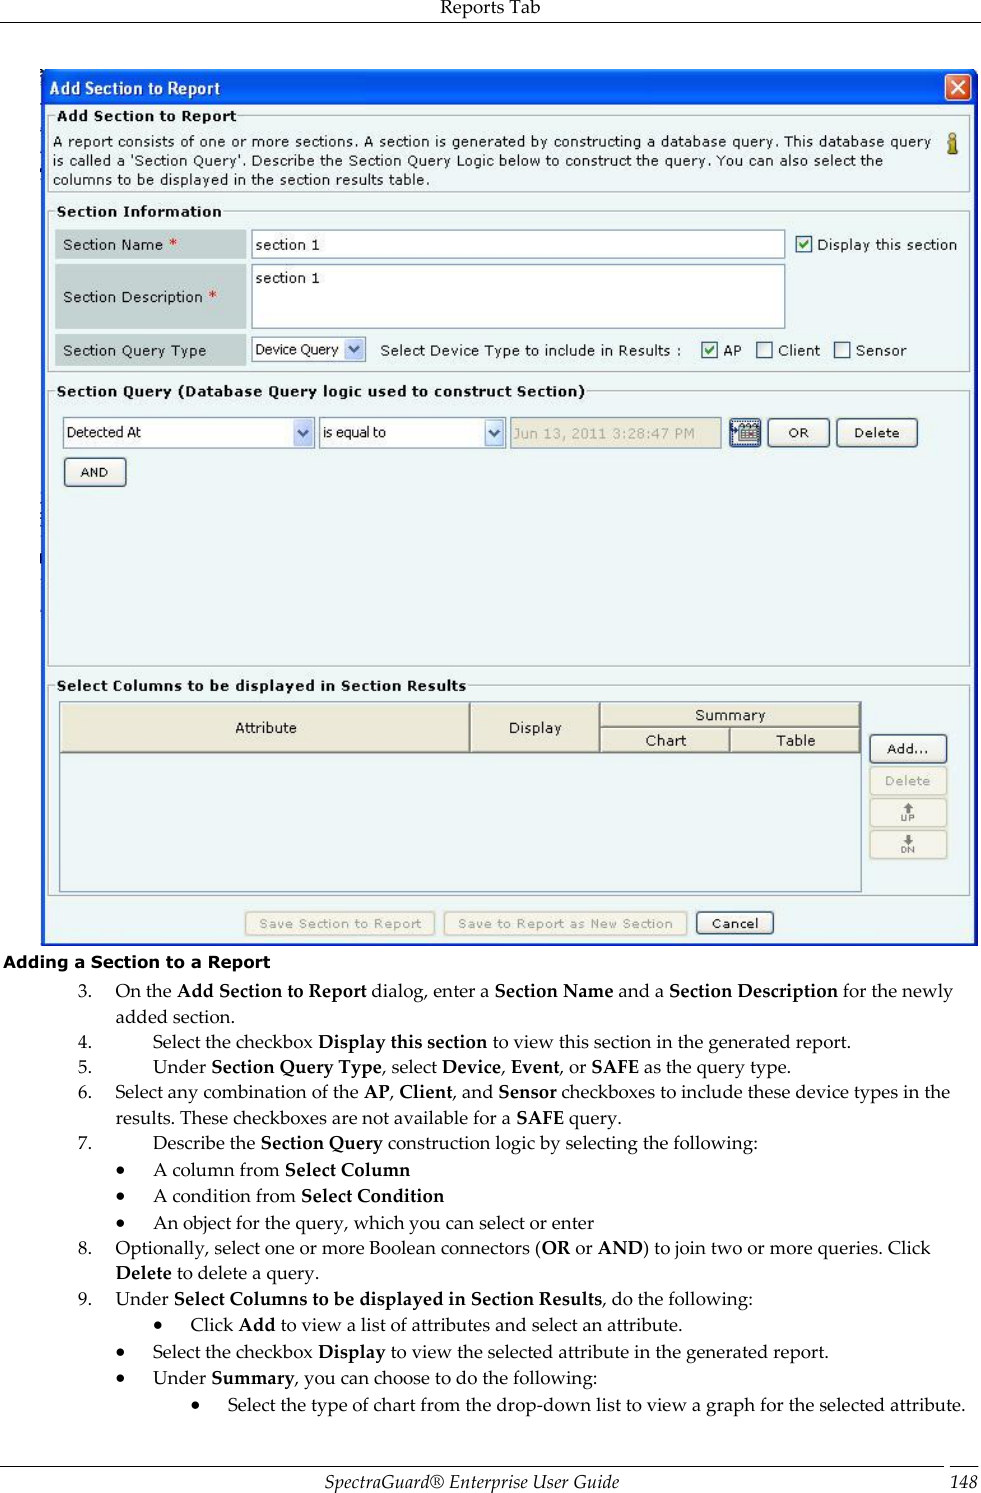 Reports Tab SpectraGuard®  Enterprise User Guide 148  Adding a Section to a Report 3. On the Add Section to Report dialog, enter a Section Name and a Section Description for the newly added section. 4. Select the checkbox Display this section to view this section in the generated report. 5. Under Section Query Type, select Device, Event, or SAFE as the query type. 6. Select any combination of the AP, Client, and Sensor checkboxes to include these device types in the results. These checkboxes are not available for a SAFE query. 7. Describe the Section Query construction logic by selecting the following:  A column from Select Column  A condition from Select Condition  An object for the query, which you can select or enter 8. Optionally, select one or more Boolean connectors (OR or AND) to join two or more queries. Click Delete to delete a query. 9. Under Select Columns to be displayed in Section Results, do the following:  Click Add to view a list of attributes and select an attribute.  Select the checkbox Display to view the selected attribute in the generated report.  Under Summary, you can choose to do the following:  Select the type of chart from the drop-down list to view a graph for the selected attribute. 